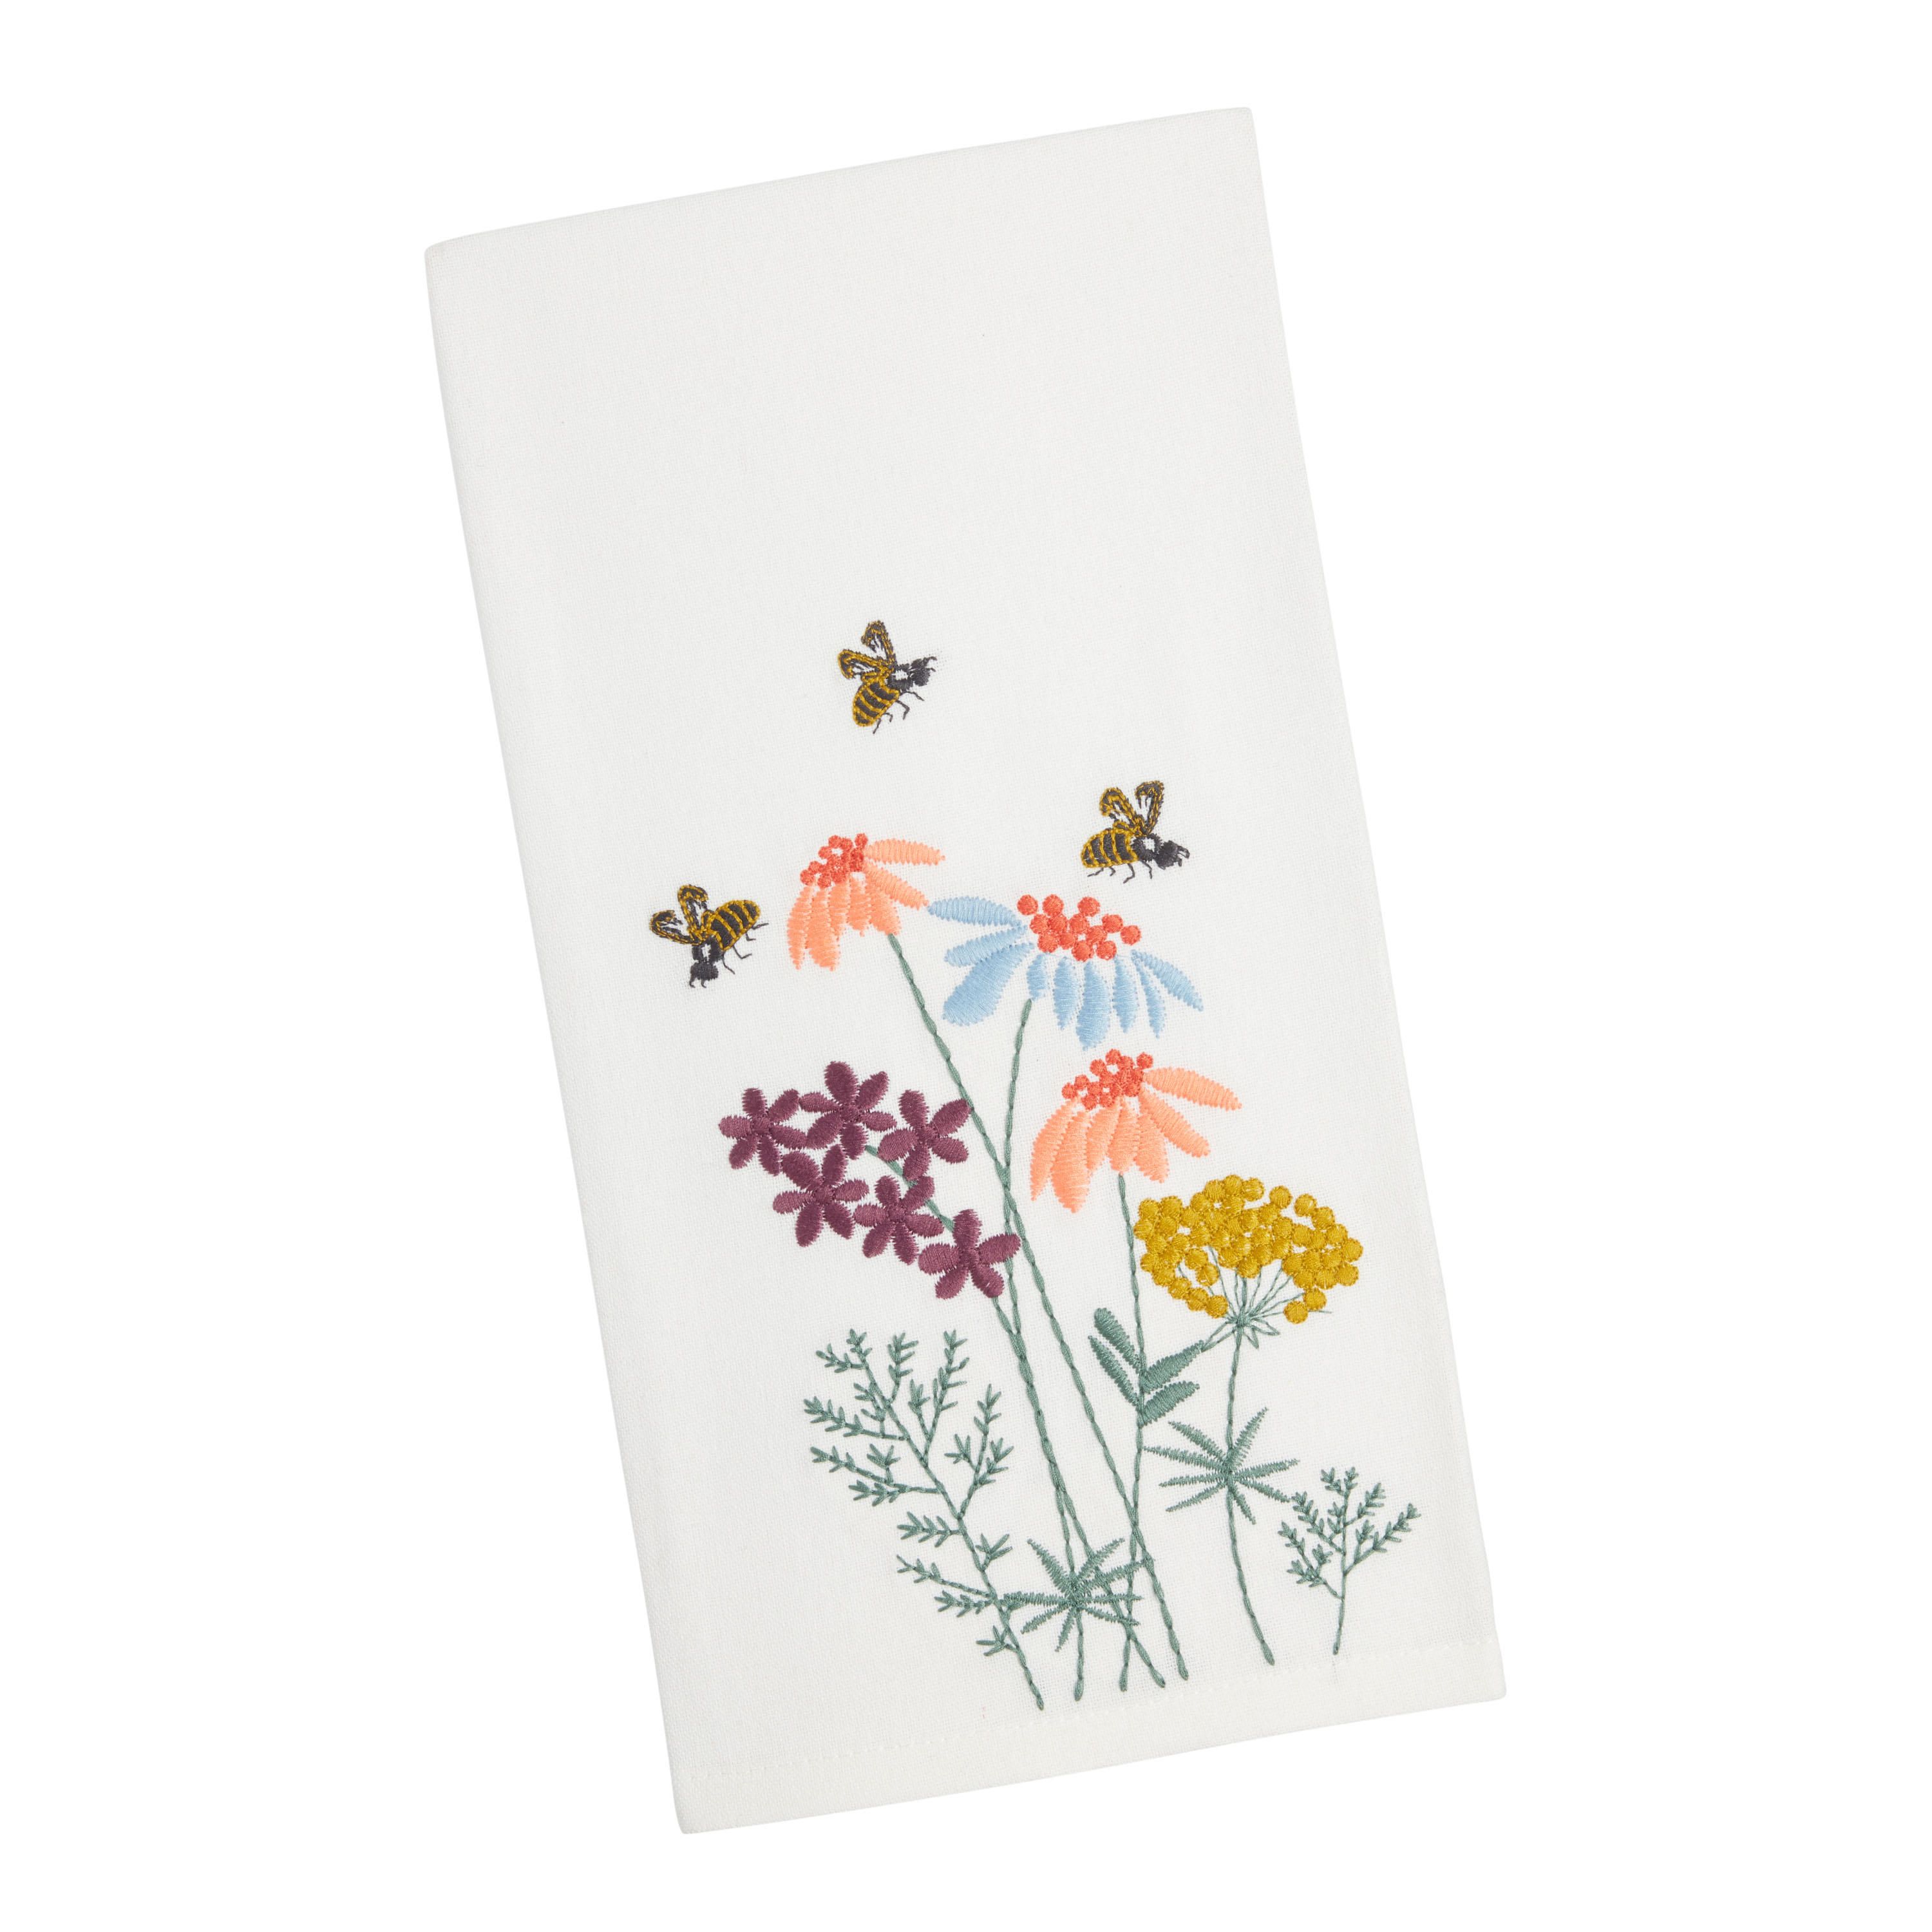 Embroidered Bee and Flowers Kitchen Towel Set of 2 | World Market